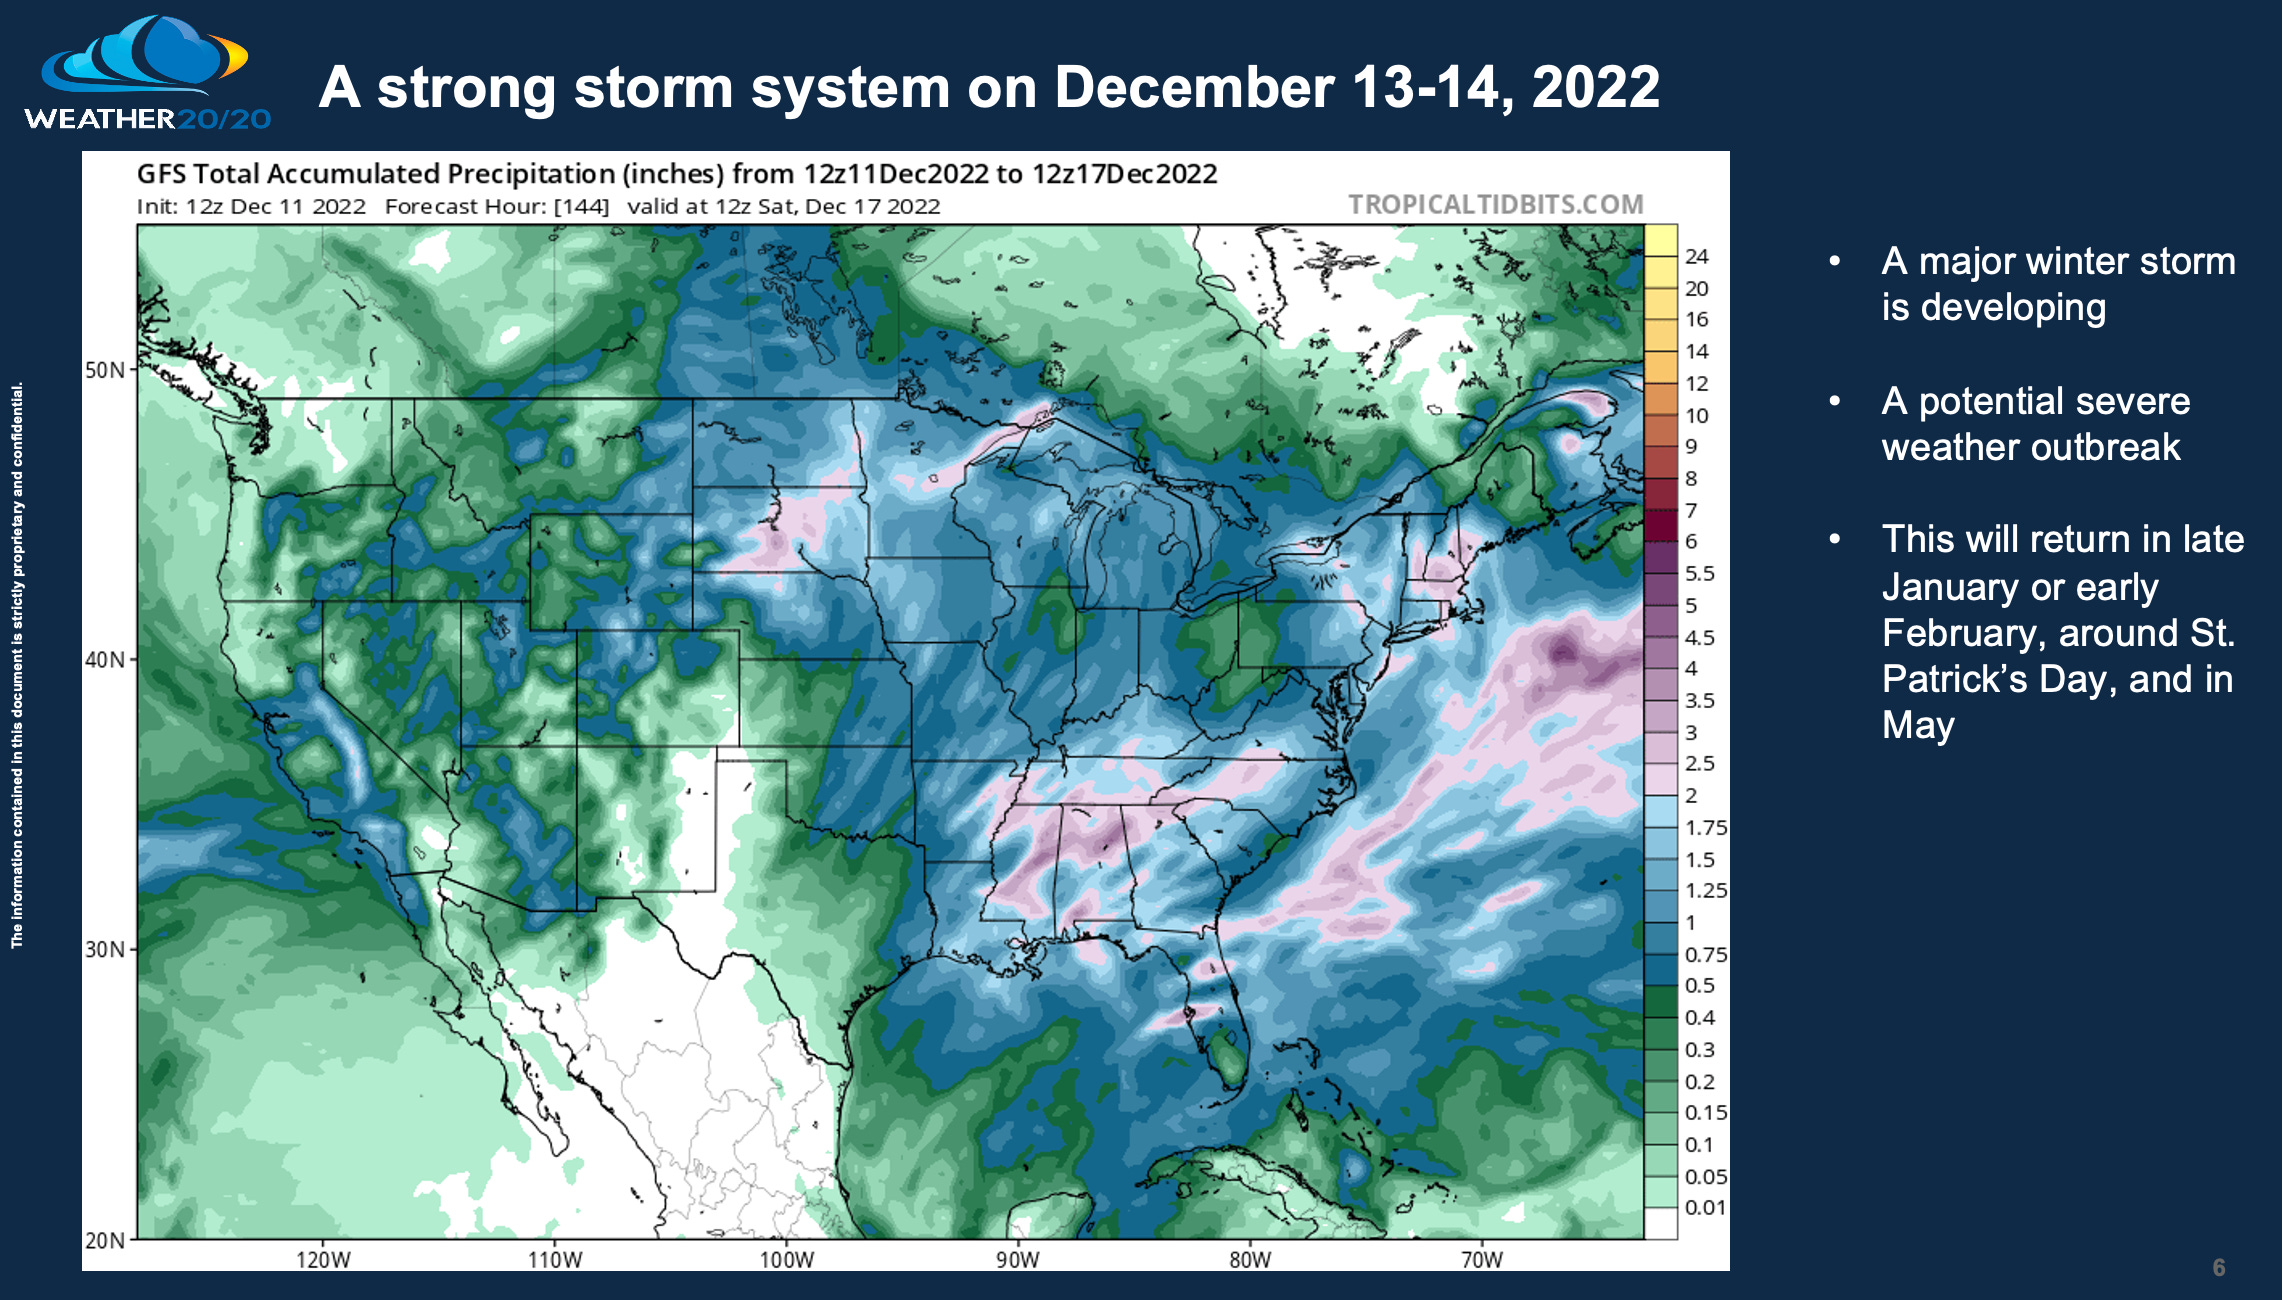 Major Winter Storm Predicted By The LRC by Gary Lezak